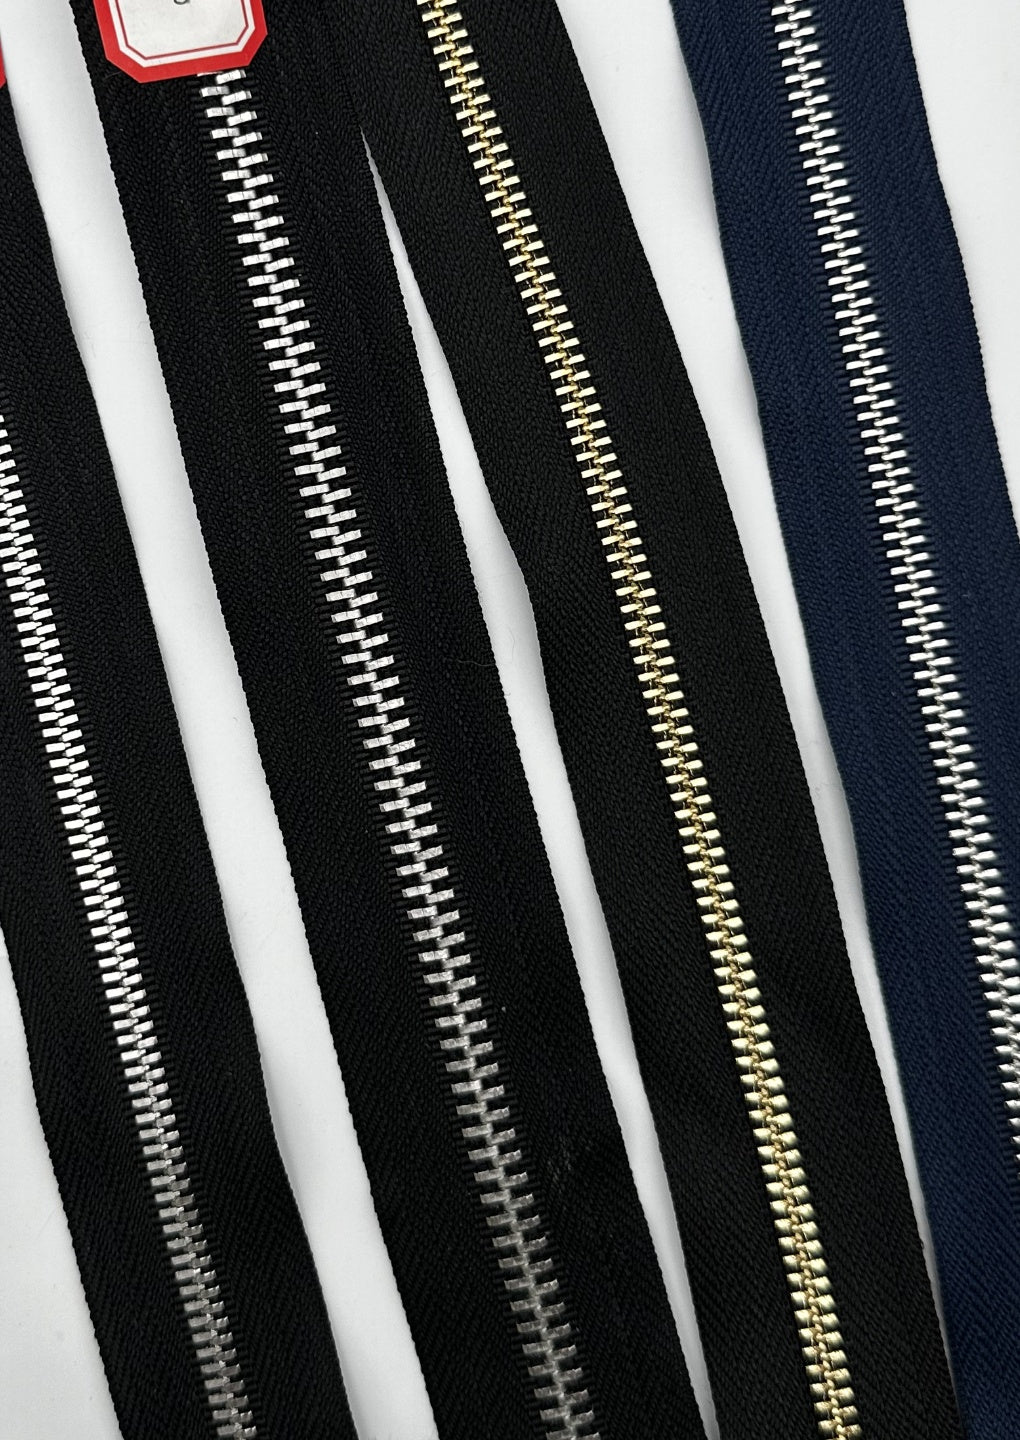 High Quality Metal Zipper 5# Open-end Sliver Garment Y Teeth Metal Sliver Zipper rmetallic zippers for jackets